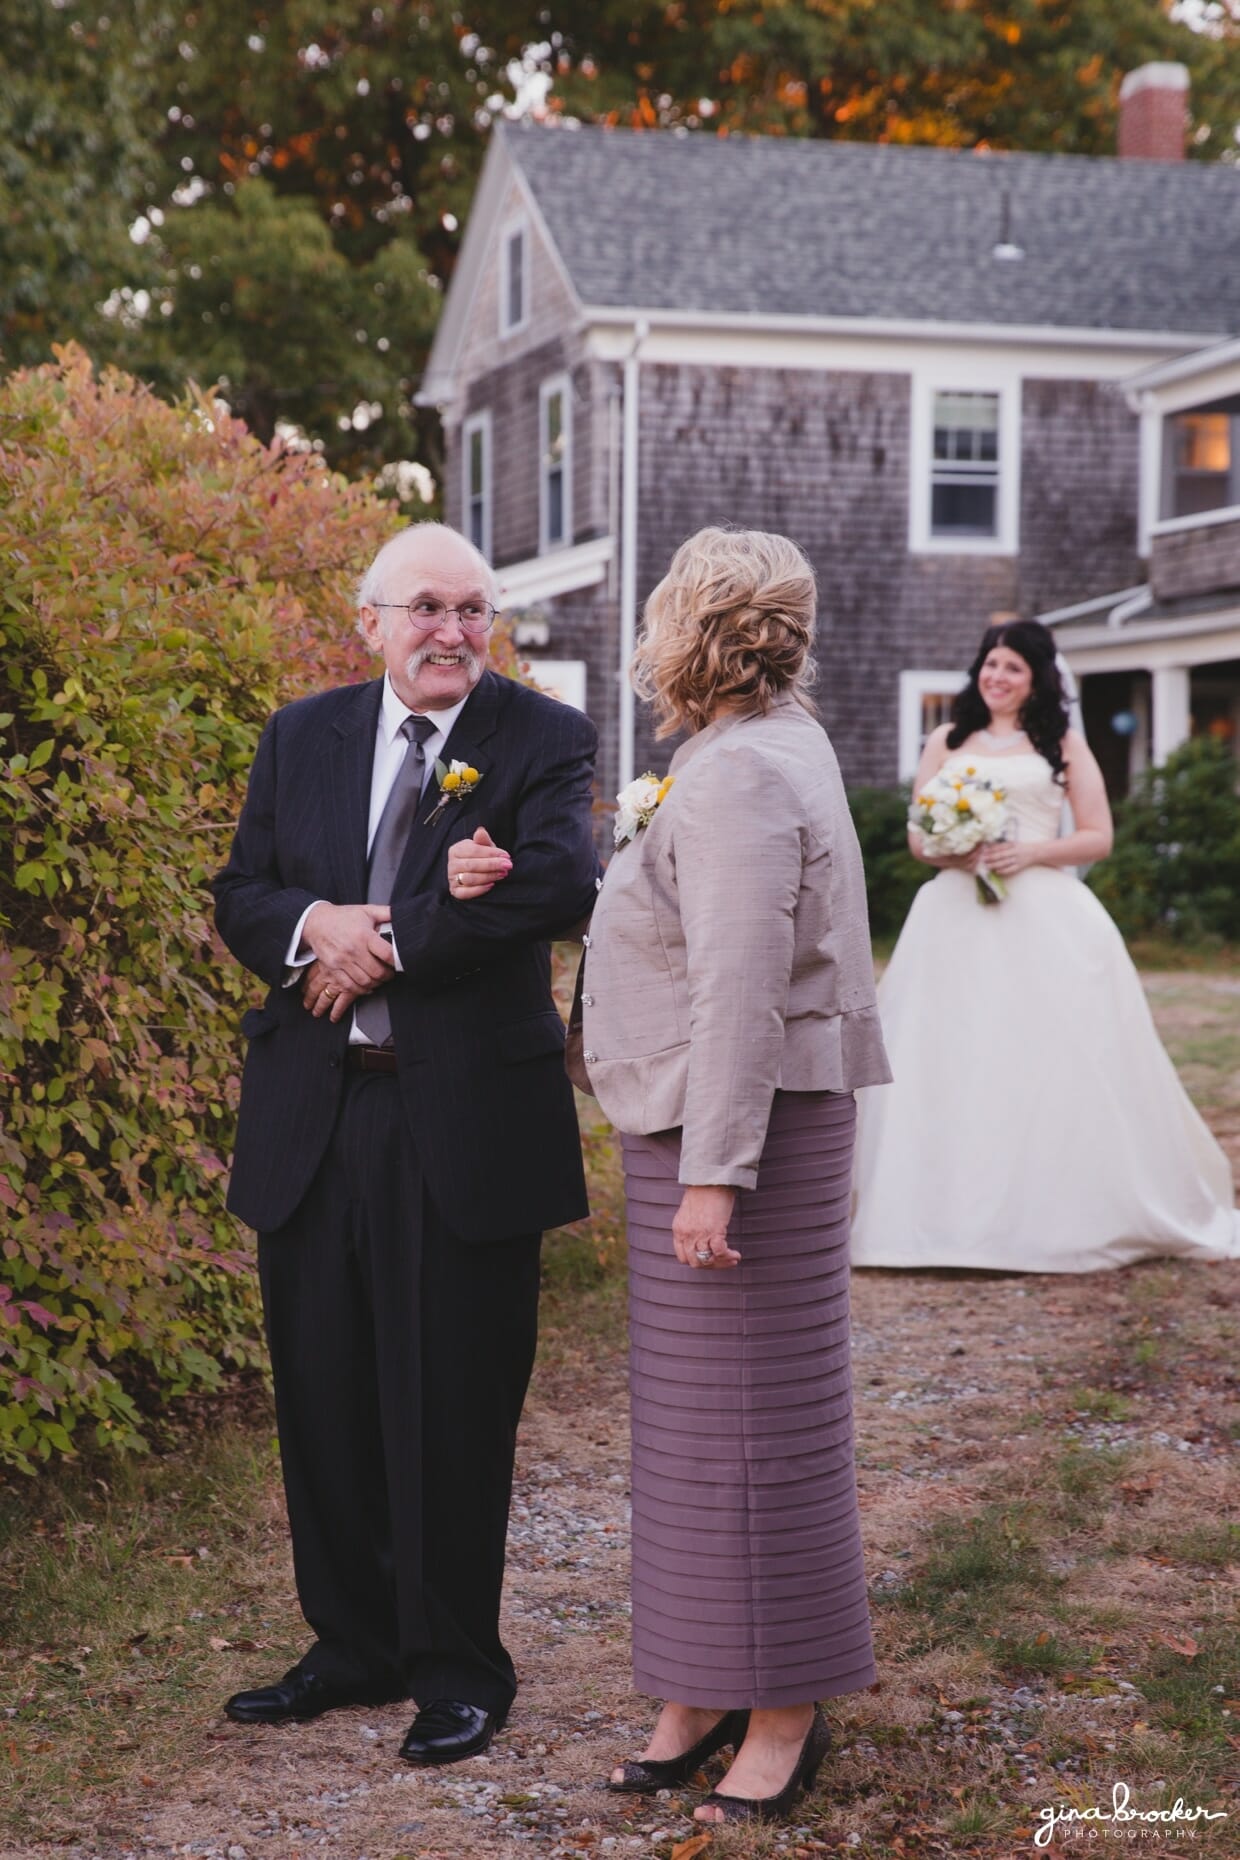 A cute and candid photograph of a bride waiting to walk up the aisle with her parents during her farm wedding in Oxford, Massachusetts